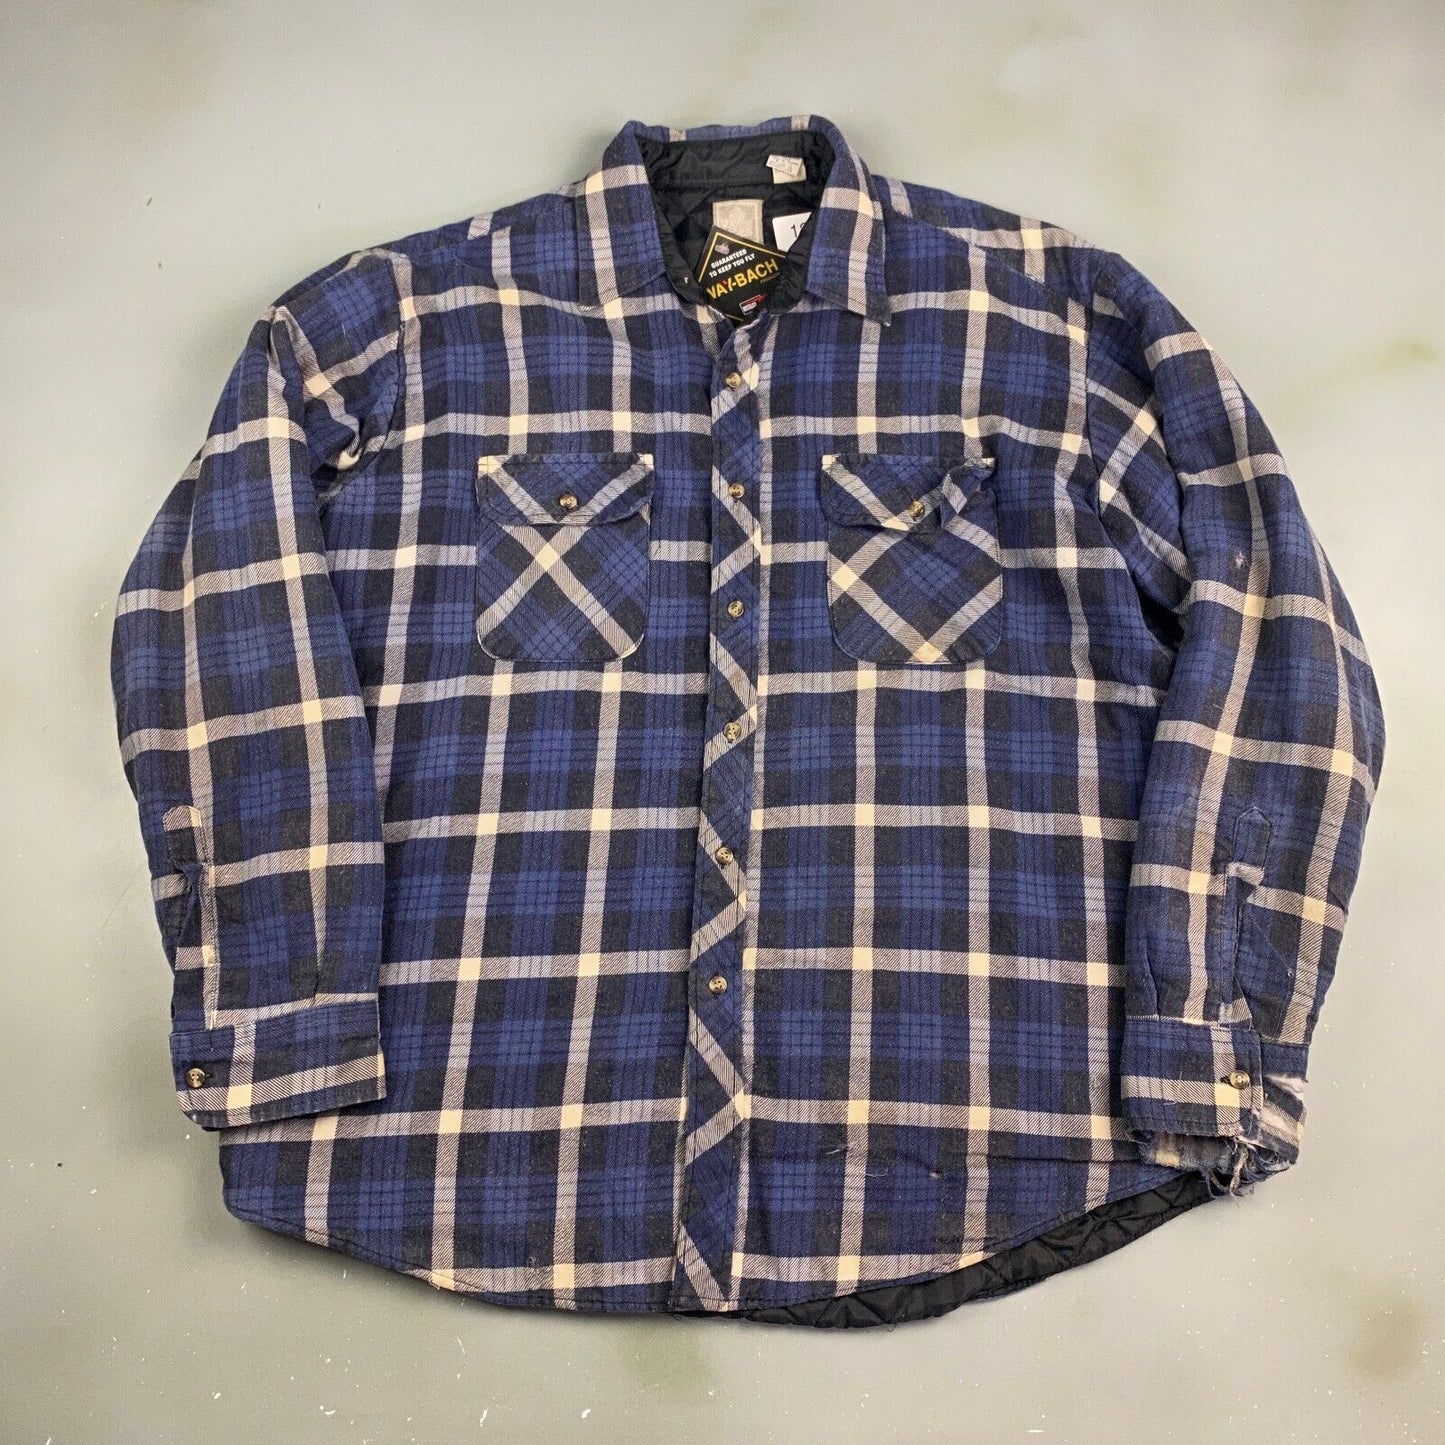 VINTAGE 90s Outdoor Exchange Plaid Lined Flannel Button Up Shirt sz XL Adult